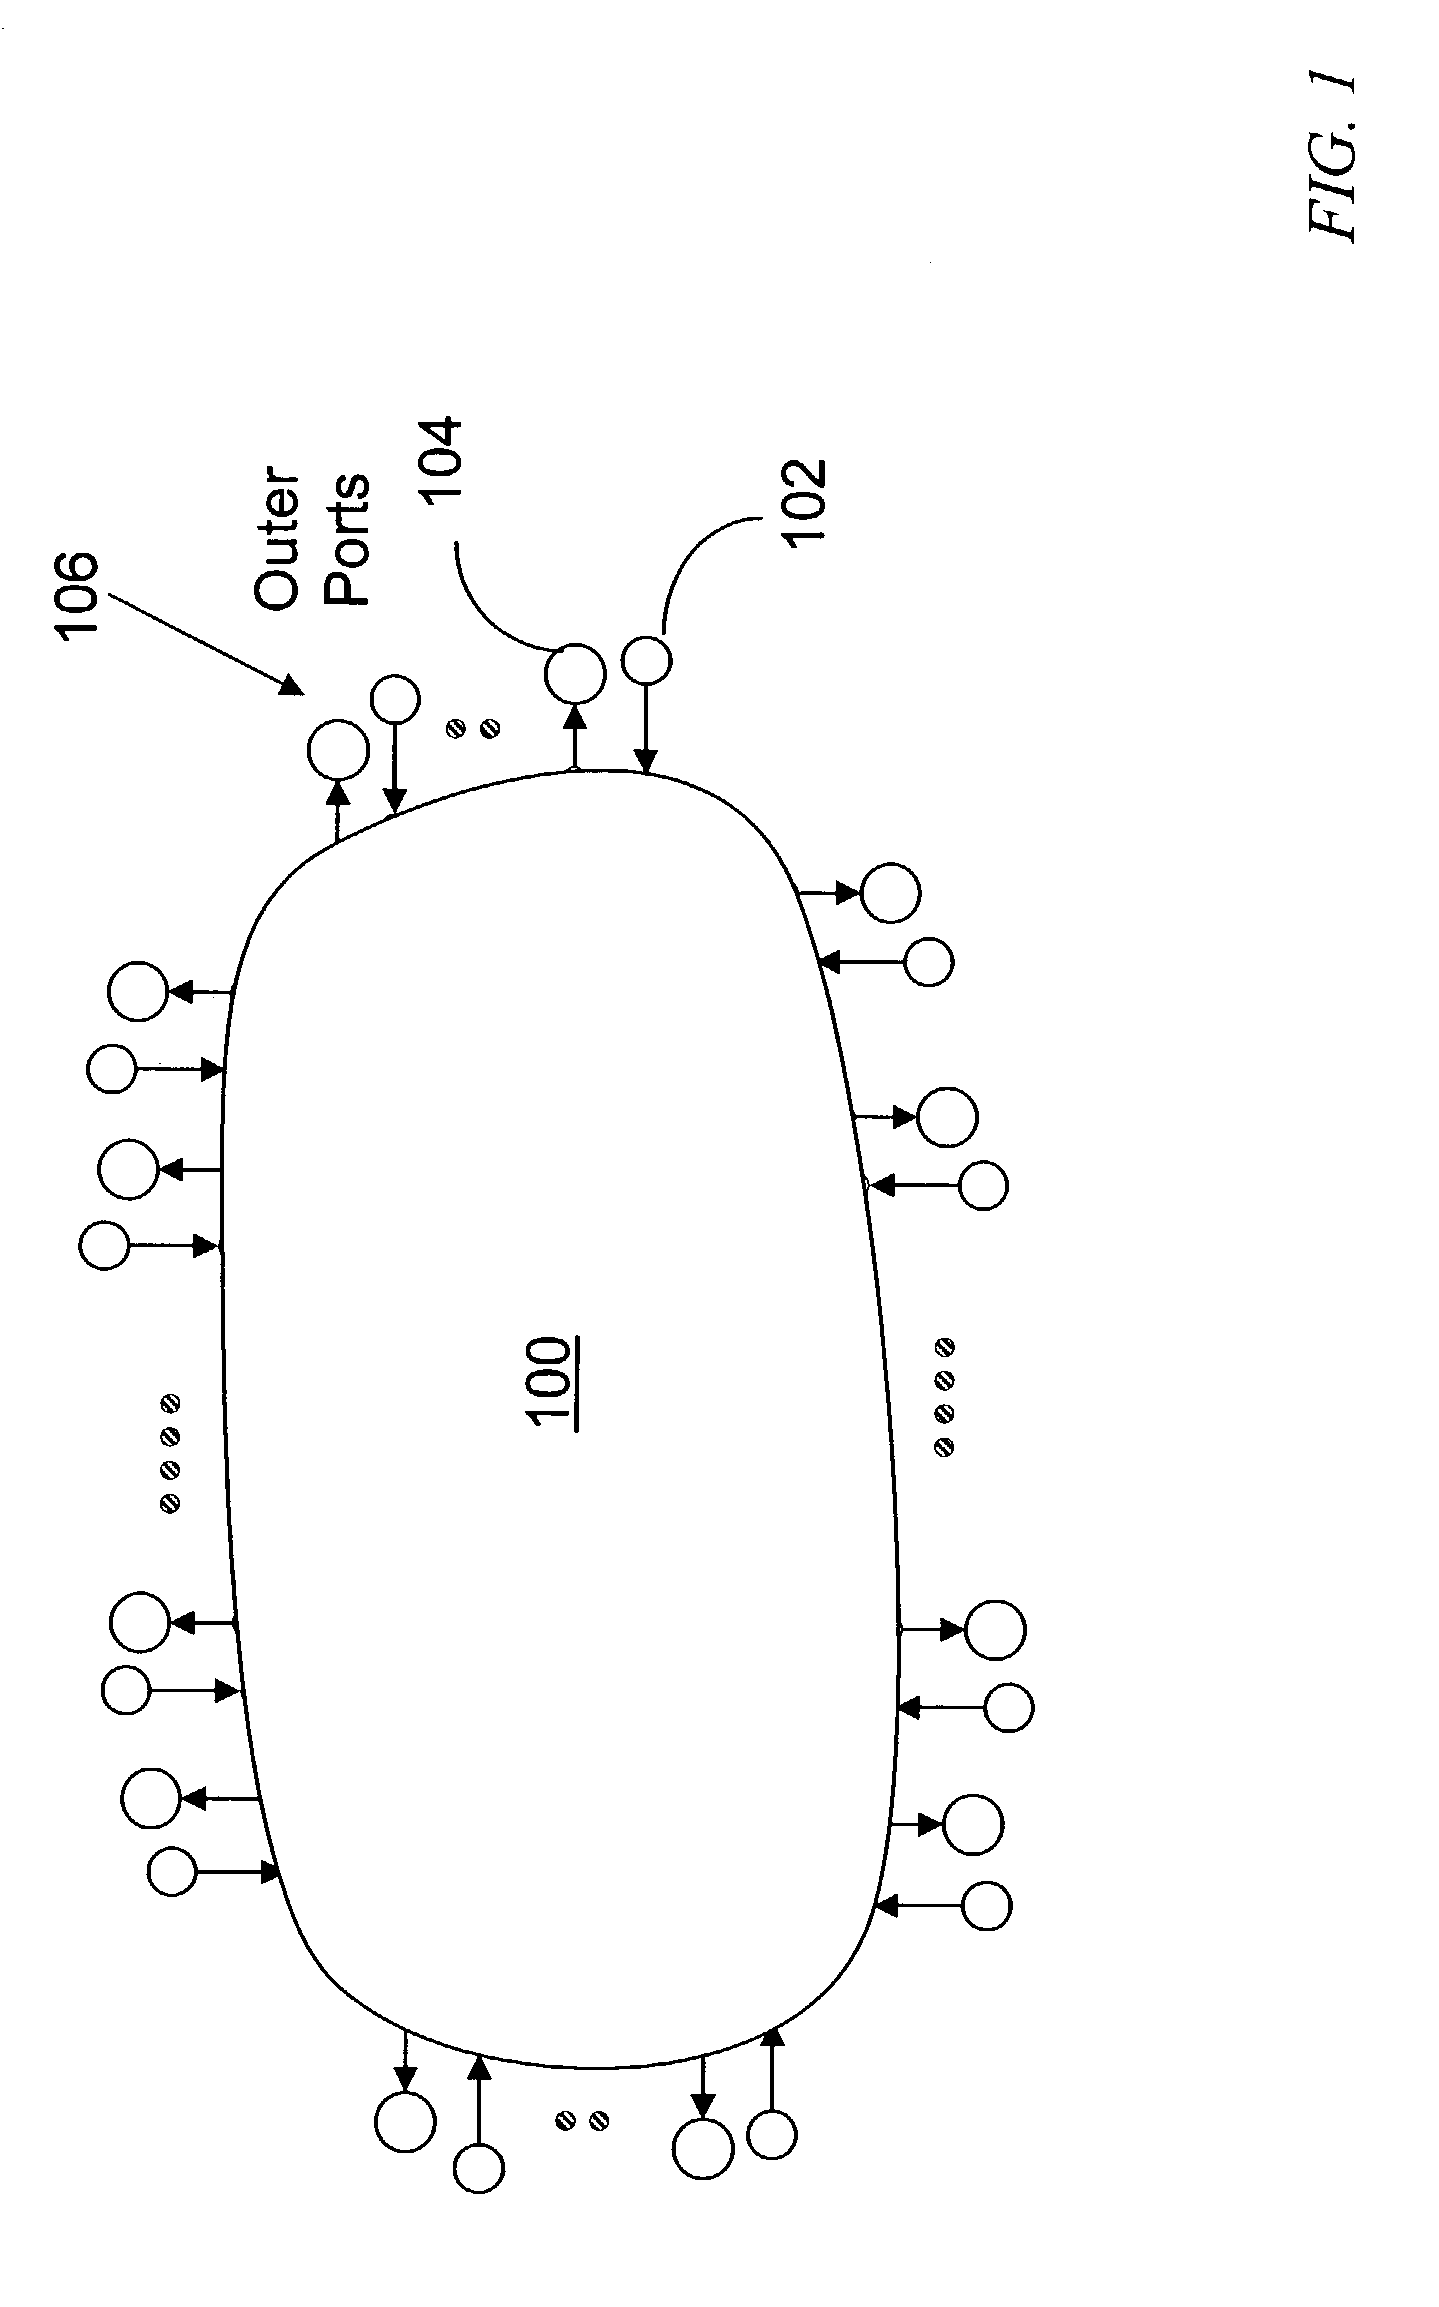 Flow-rate-regulated burst switches